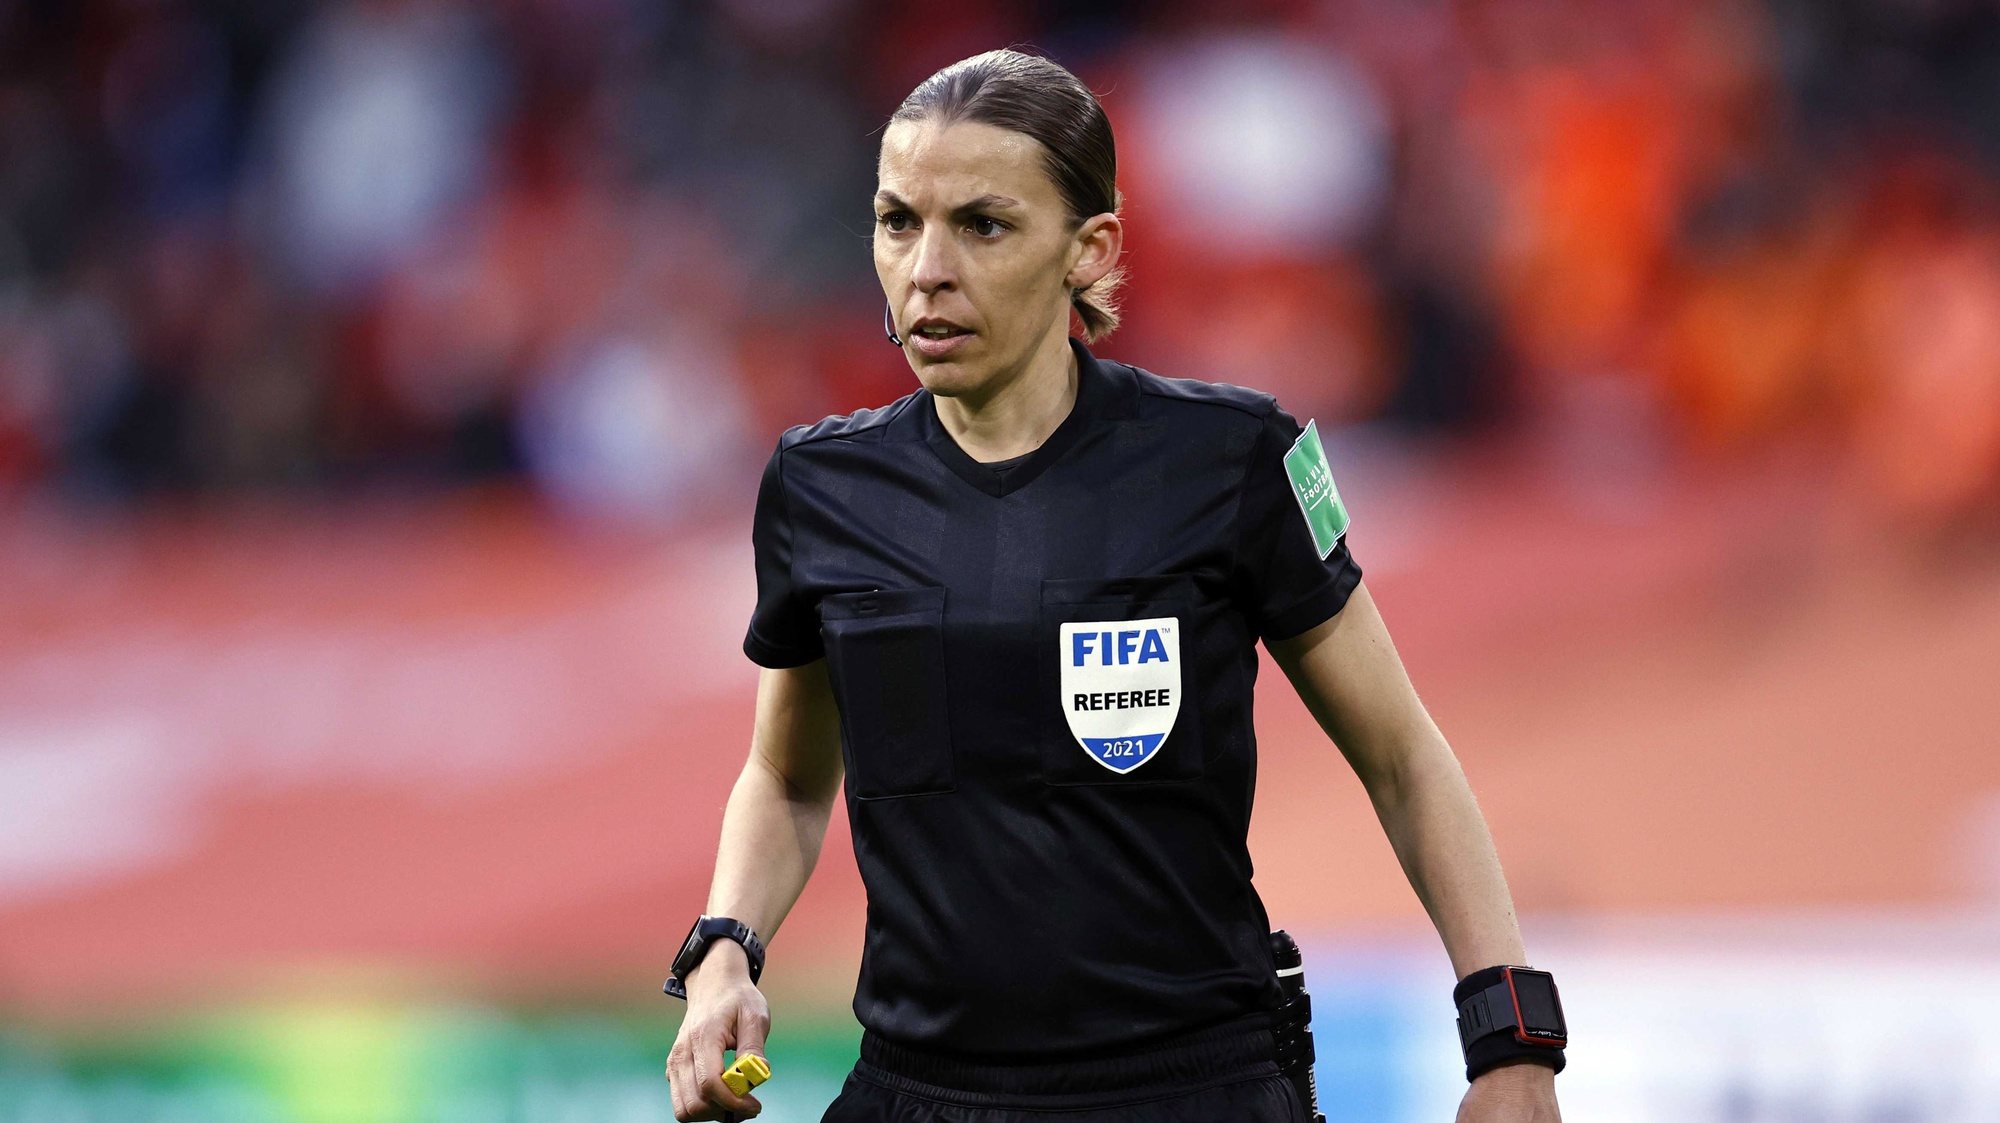 epa09101579 French referee Stephanie Frappart reacts during the FIFA World Cup 2022 qualifying match between the Netherlands and Latvia at Johan Cruijff Arena in Amsterdam, The Netherlands, 27 March 2021.  EPA/MAURICE VAN STEEN